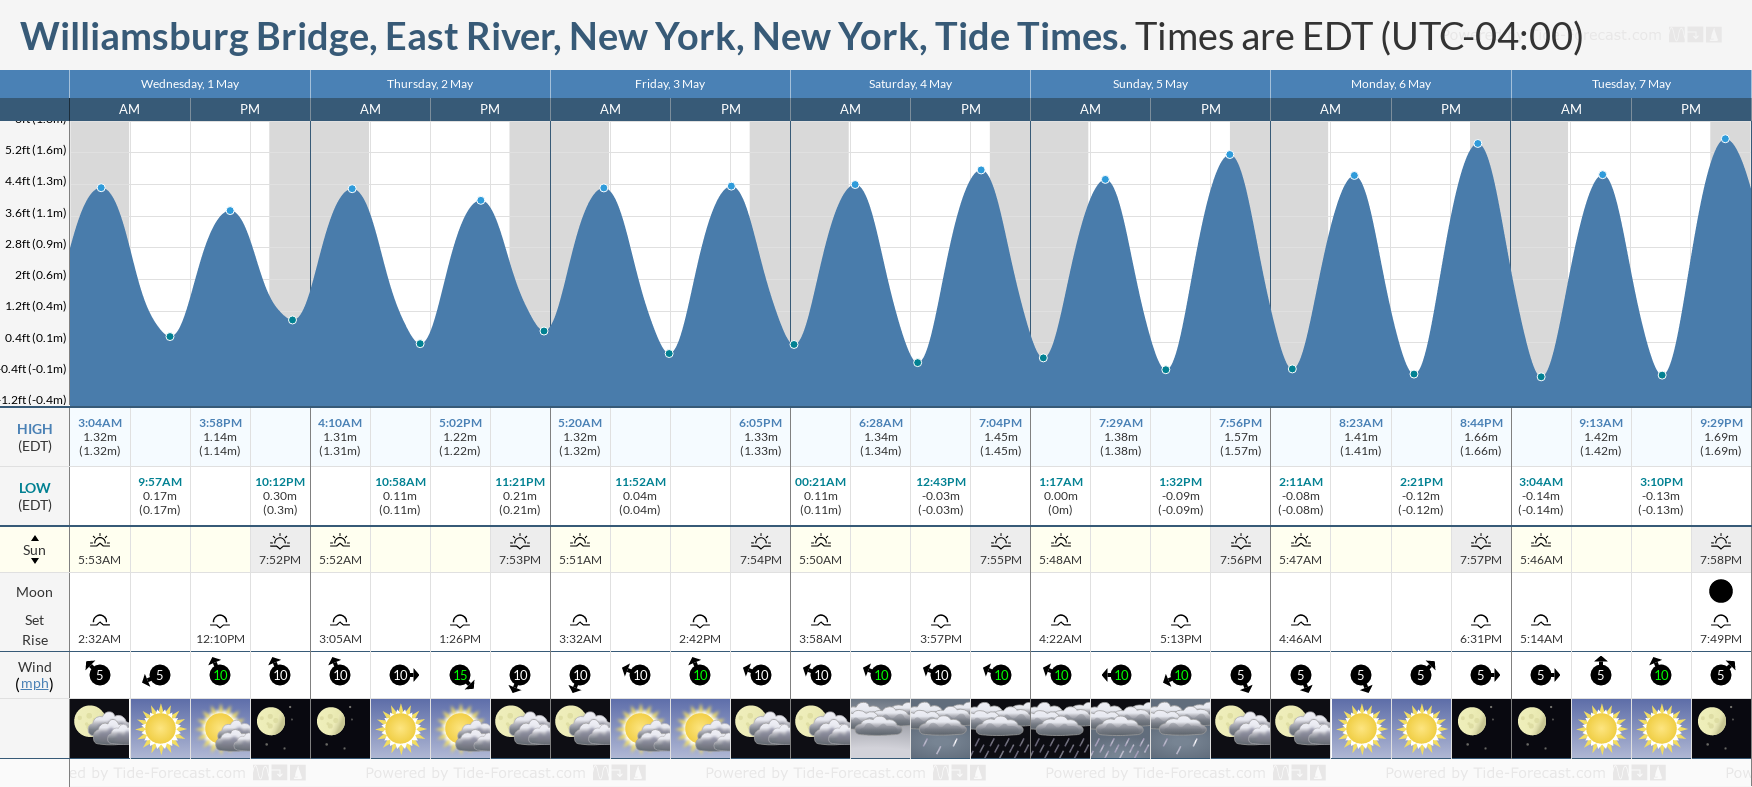 Williamsburg Bridge, East River, New York, New York Tide Chart including high and low tide tide times for the next 7 days